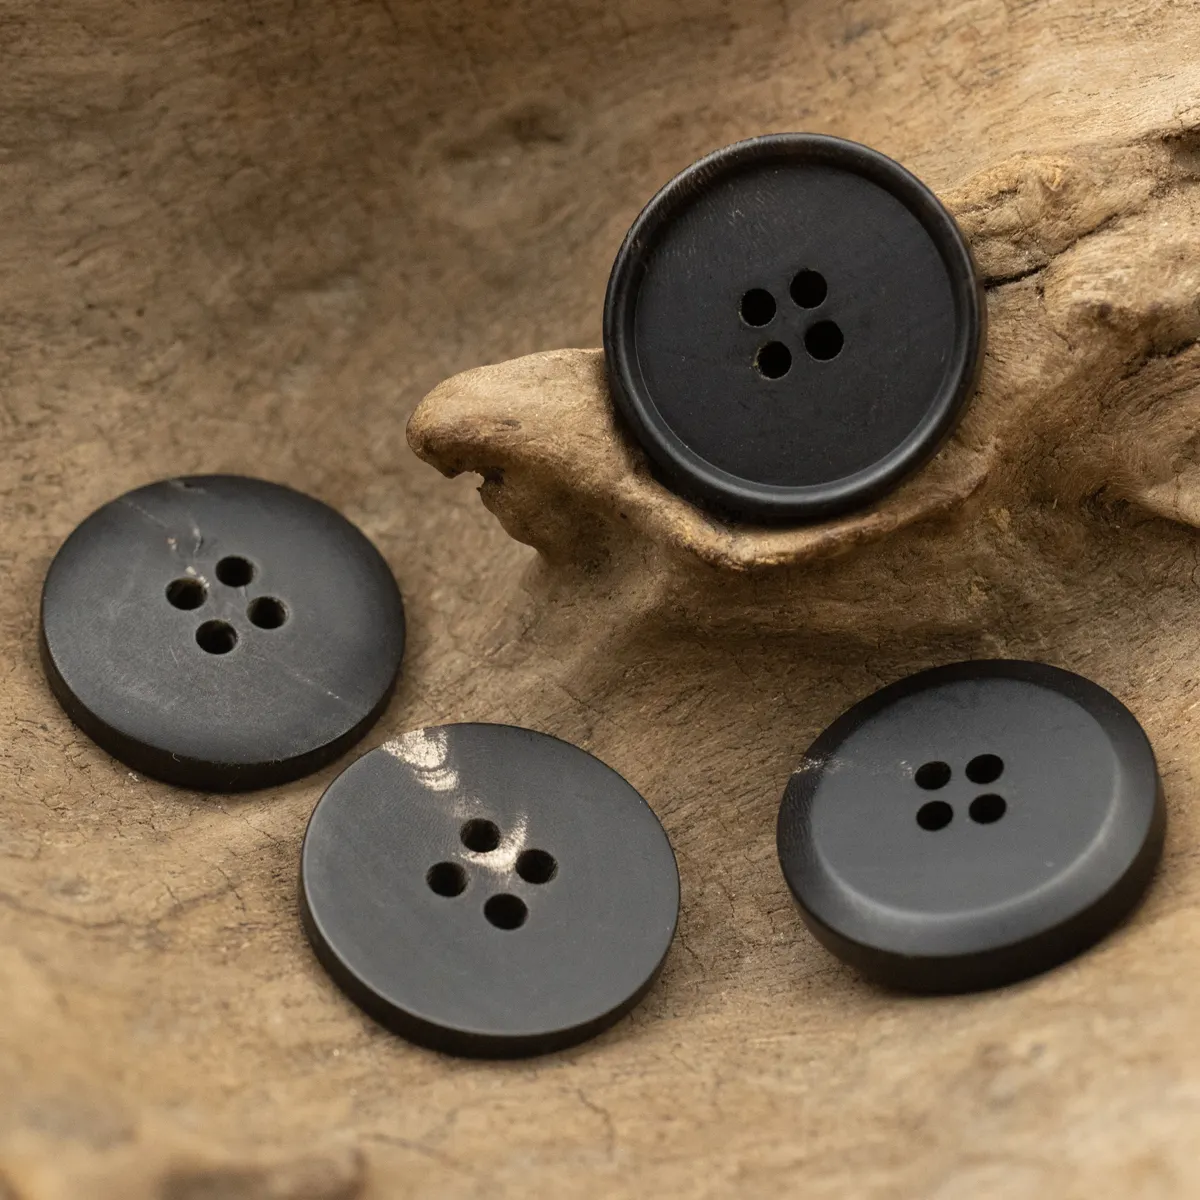 Buttons Button Matte Round Rim Genuine Horn Buttons 4 Hole Classic Wholesale Factory Full Size Black Button High Quality